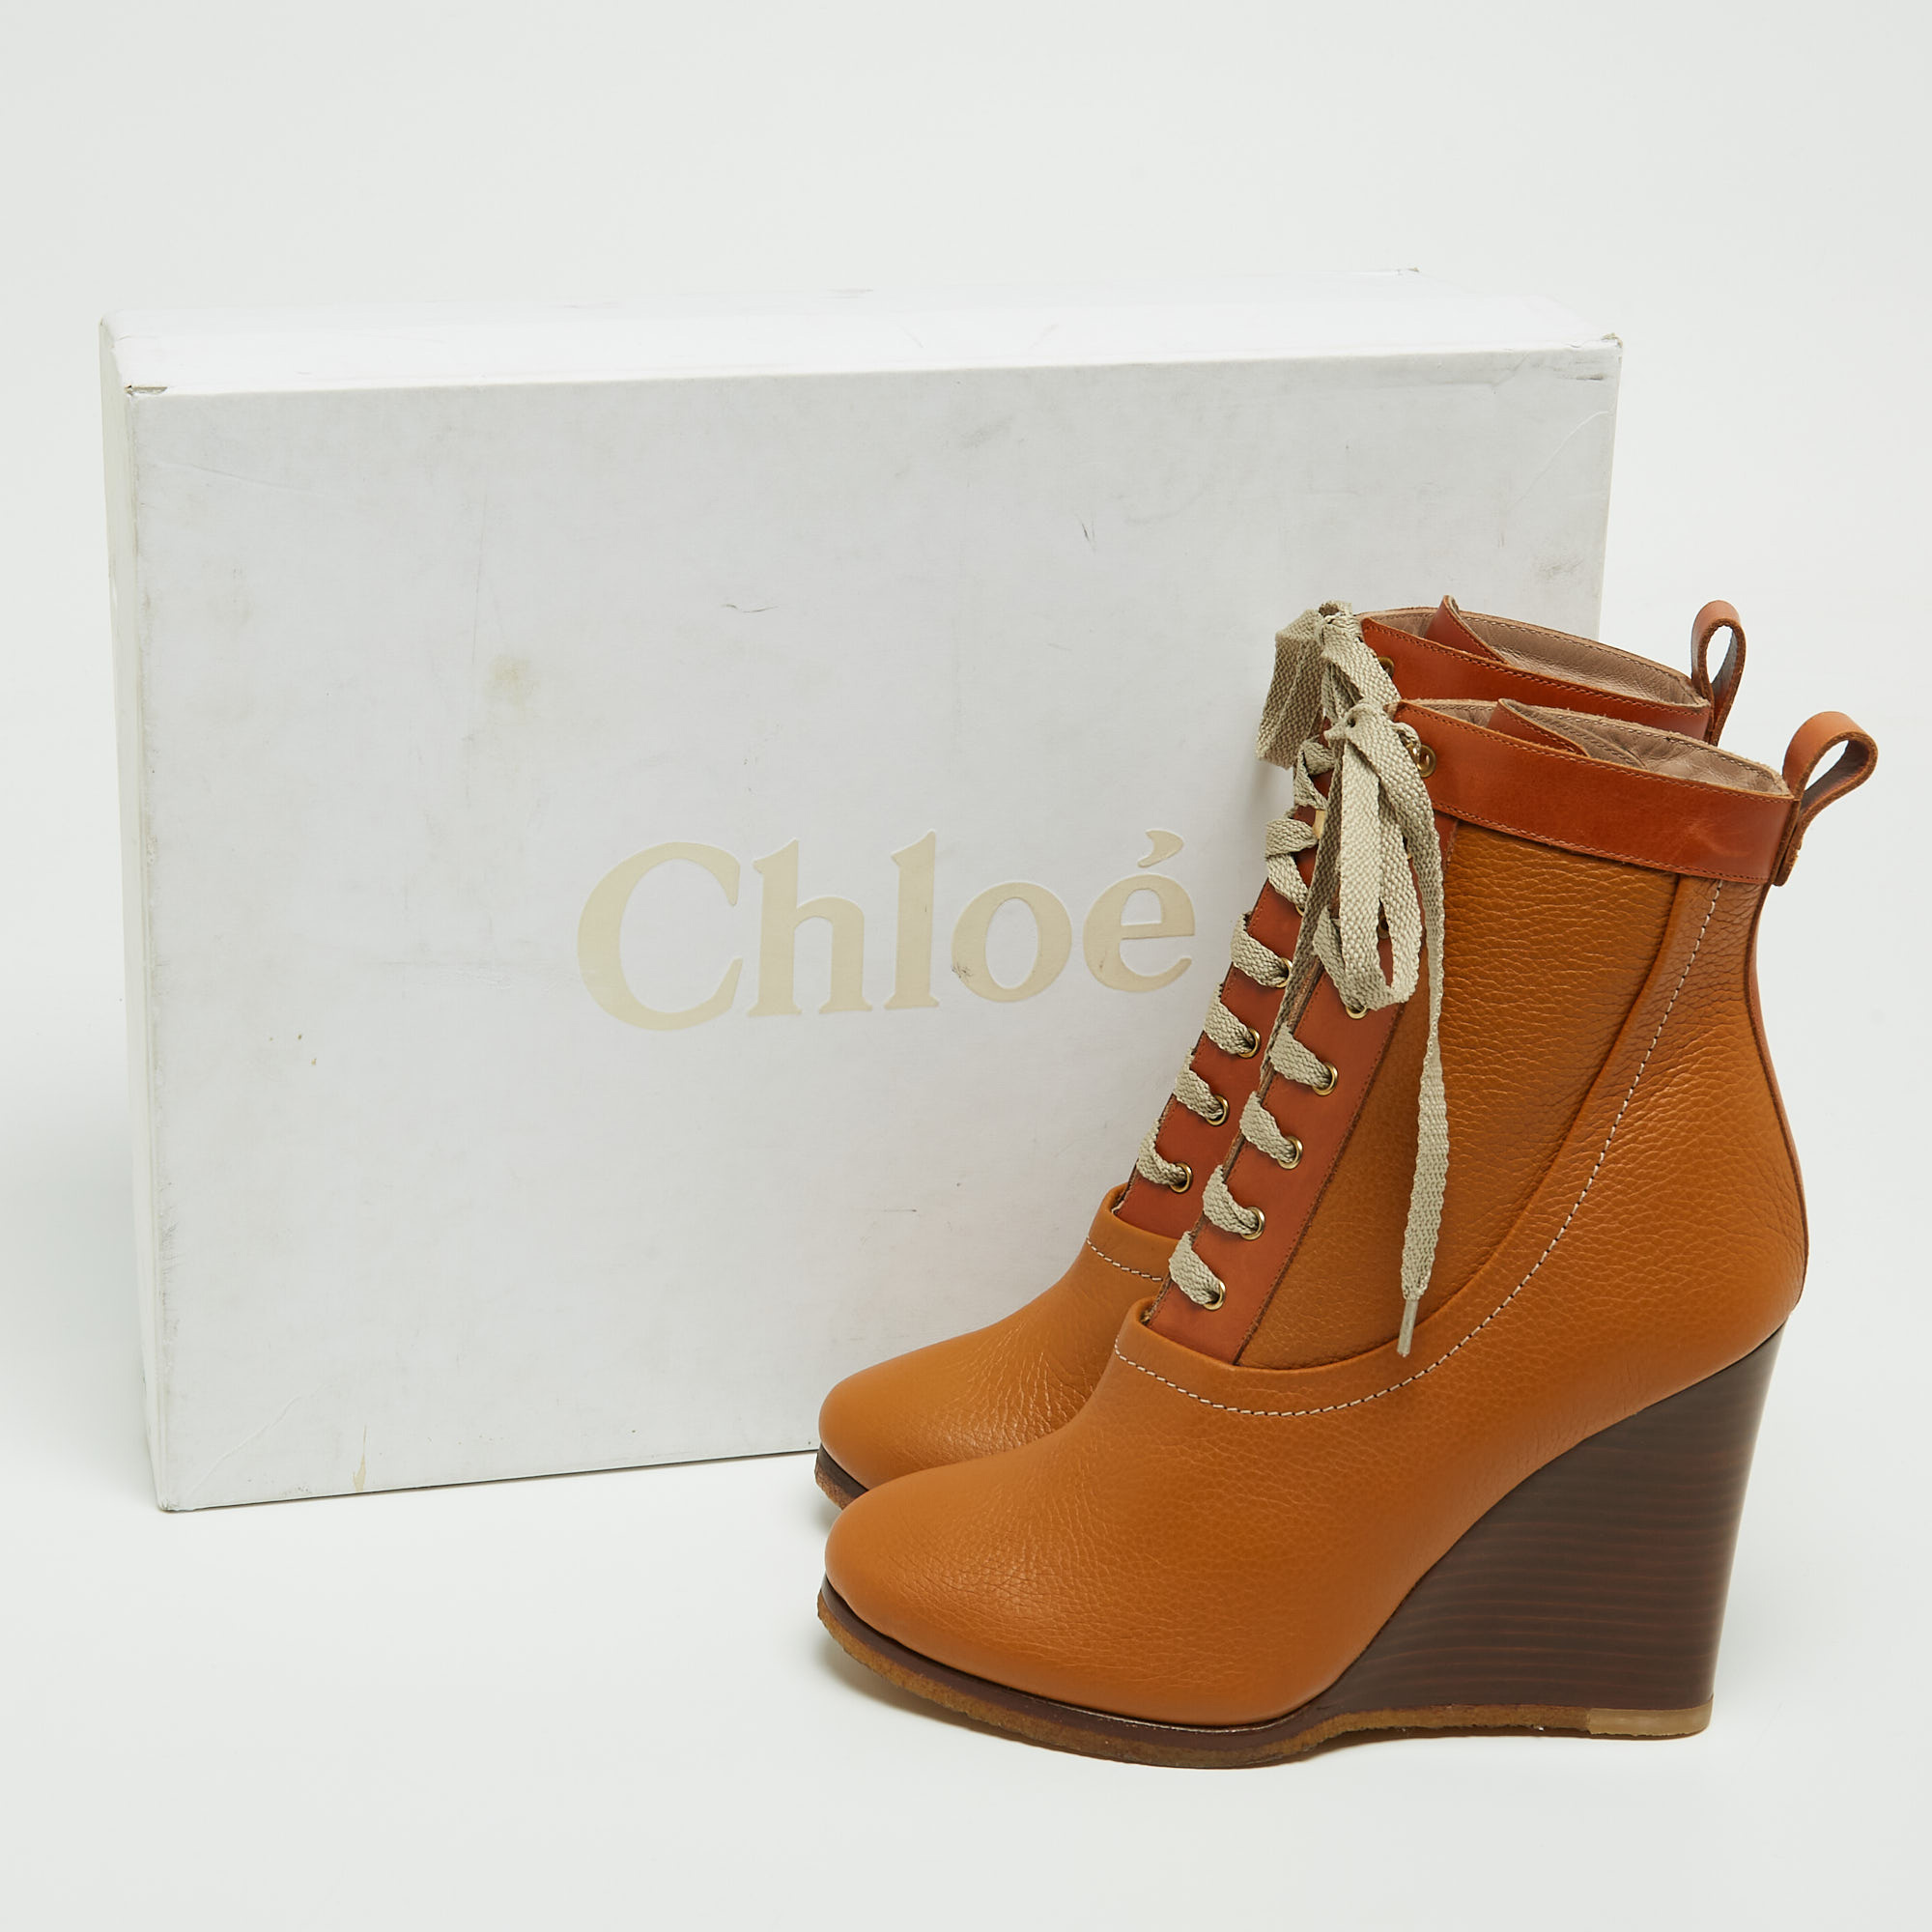 Chloe Brown Leather Lace Up Wedge Ankle Boots Size 37.5